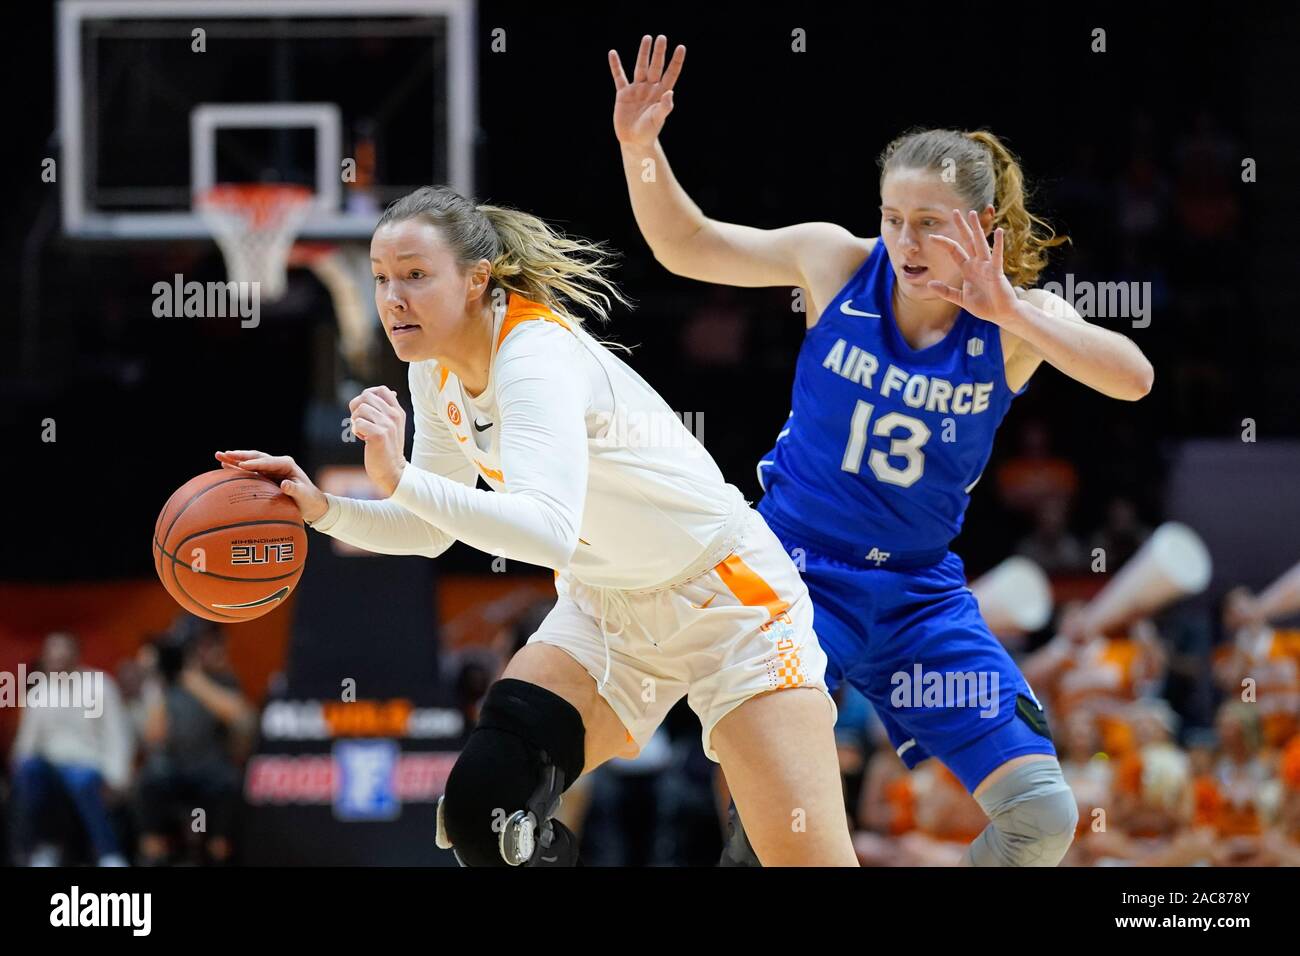 December 1, 2019: Lou Brown #21 of the Tennessee Lady Vols drives to the  basket against Emily Conroe #13 of the Air Force Falcons during the NCAA  basketball game between the University